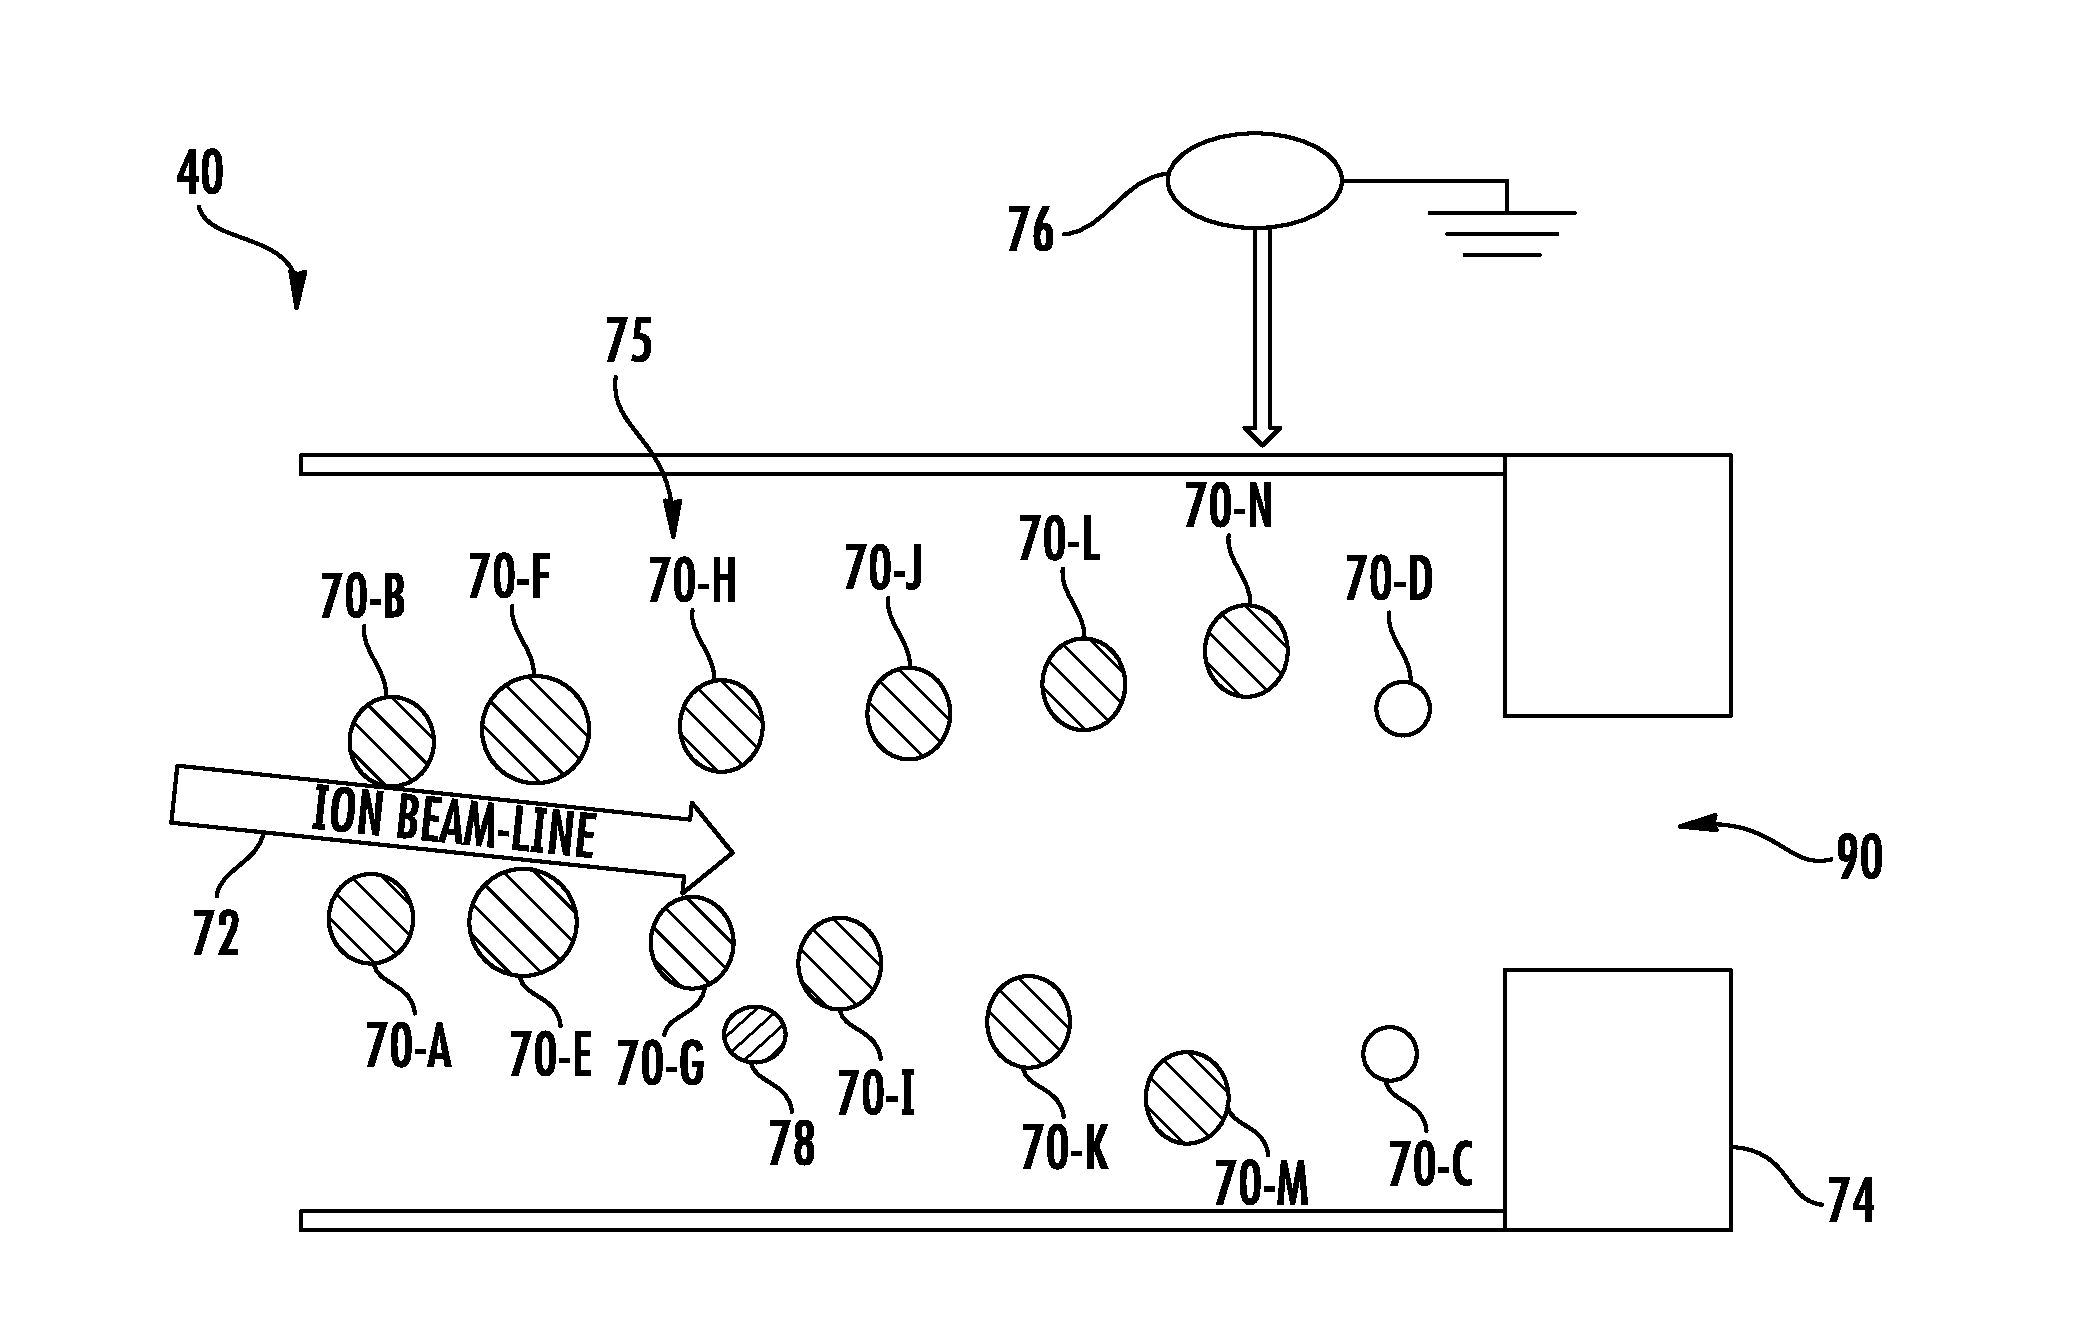 Controlling contamination particle trajectory from a beam-line electrostatic element